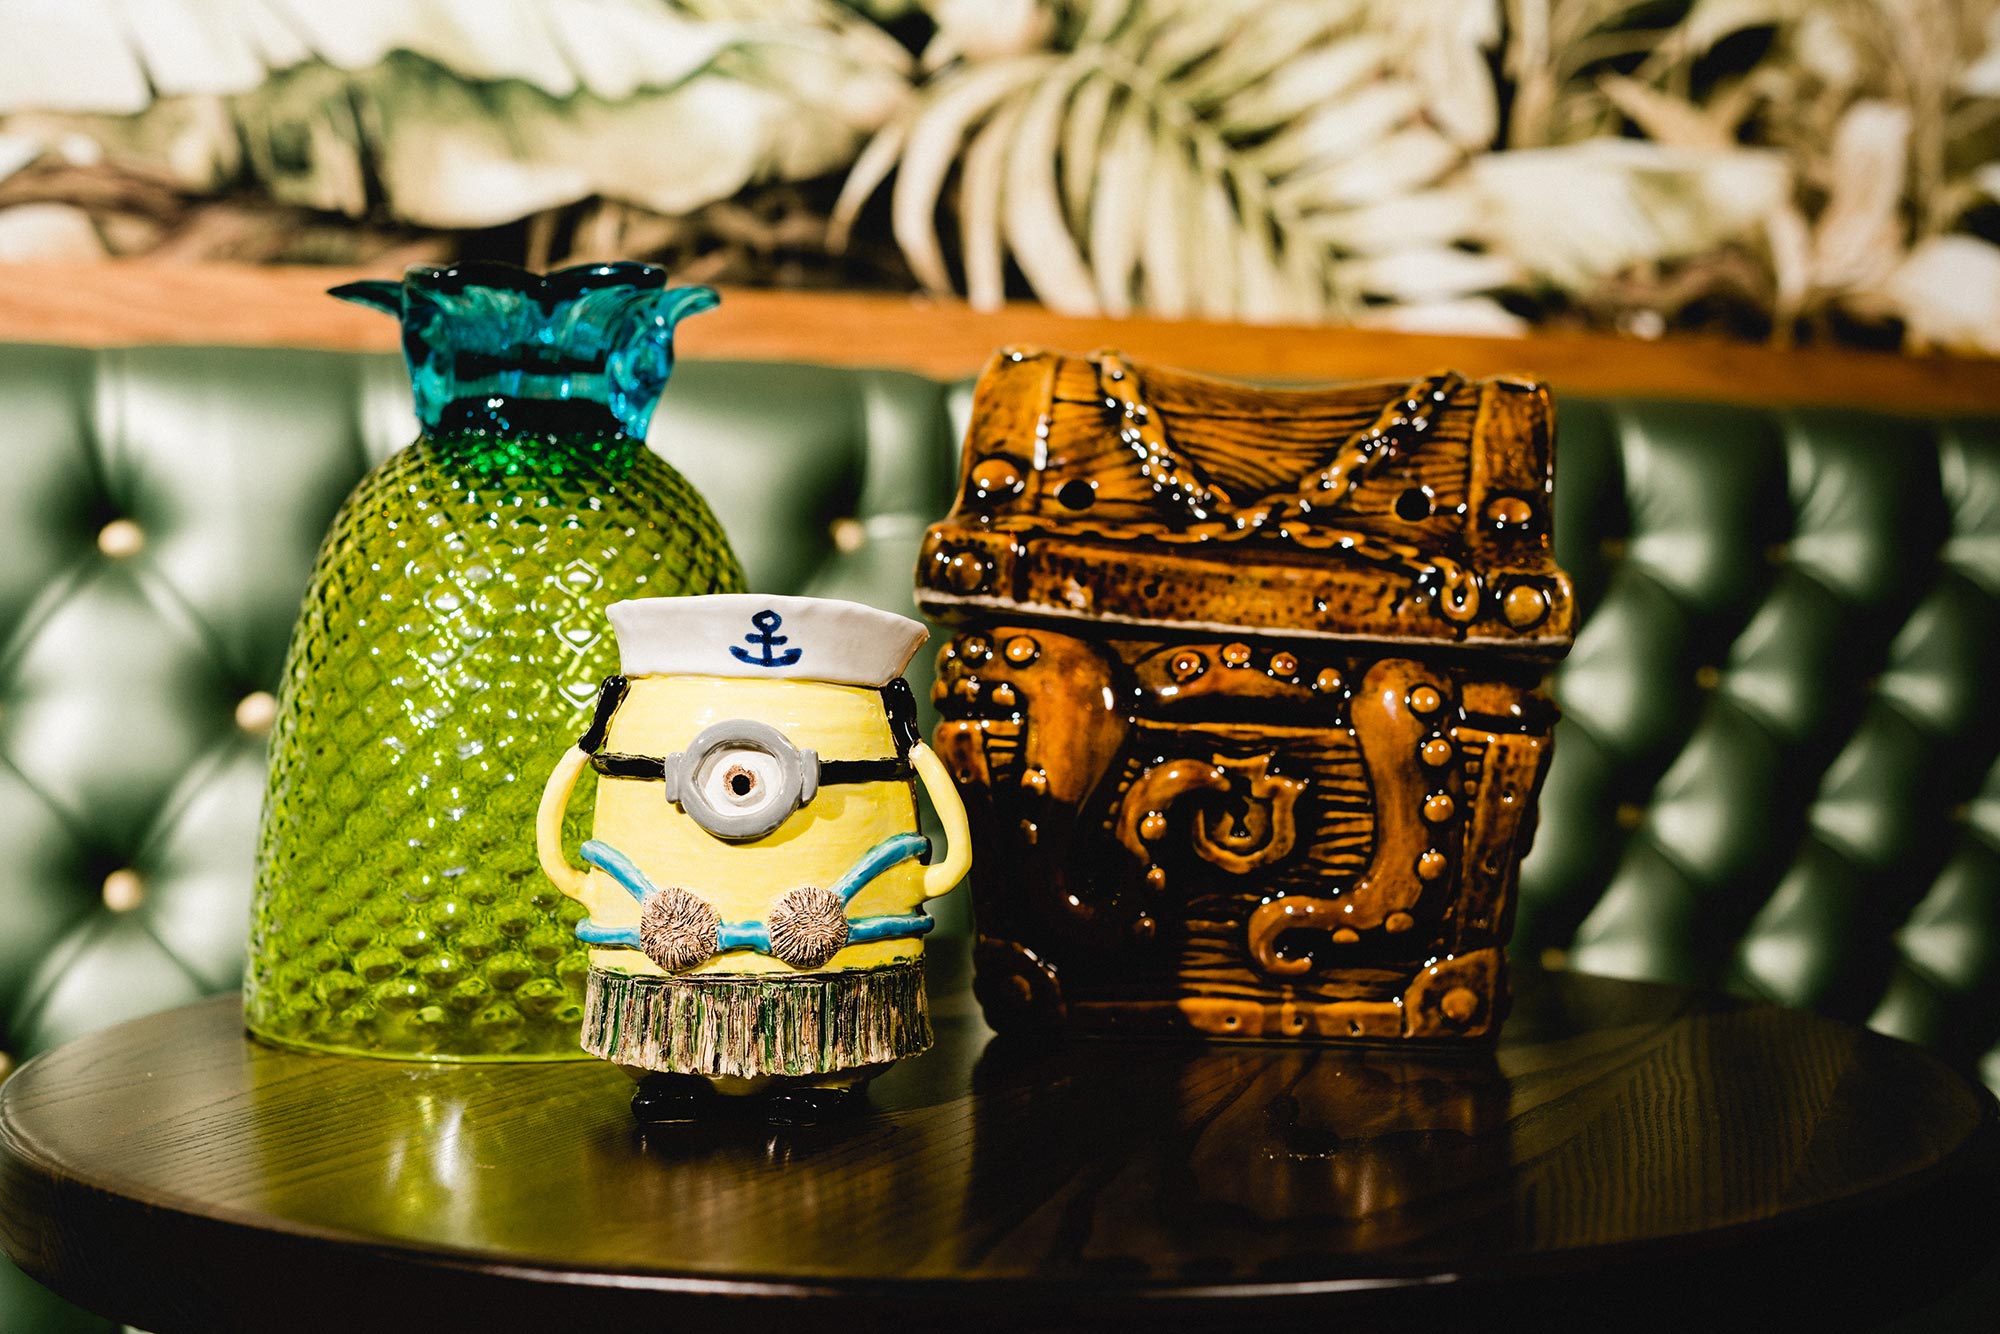 Tiki decoration including a glass pineapple shaped bowl, Despicable Me Minion dressed in a hula skirt and sailor cap, and ceramic treasure chest with octopus tentacles sticking out of it on a table at Shore Leave tiki bar in Boston.